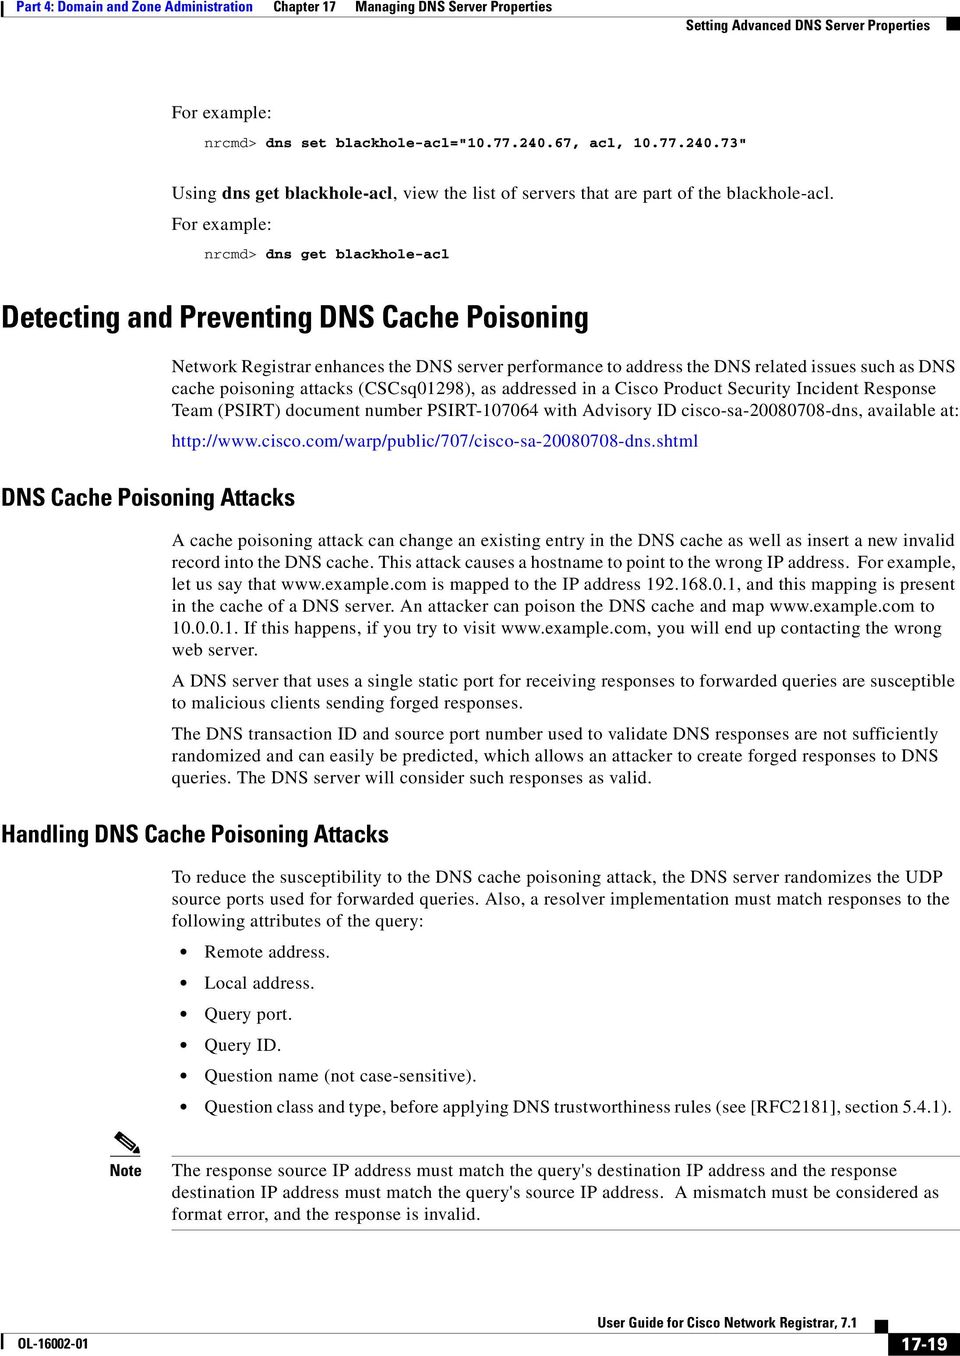 For example: nrcmd> dns get blackhole-acl Detecting and Preventing DNS Cache Poisoning DNS Cache Poisoning Attacks Network Registrar enhances the DNS server performance to address the DNS related